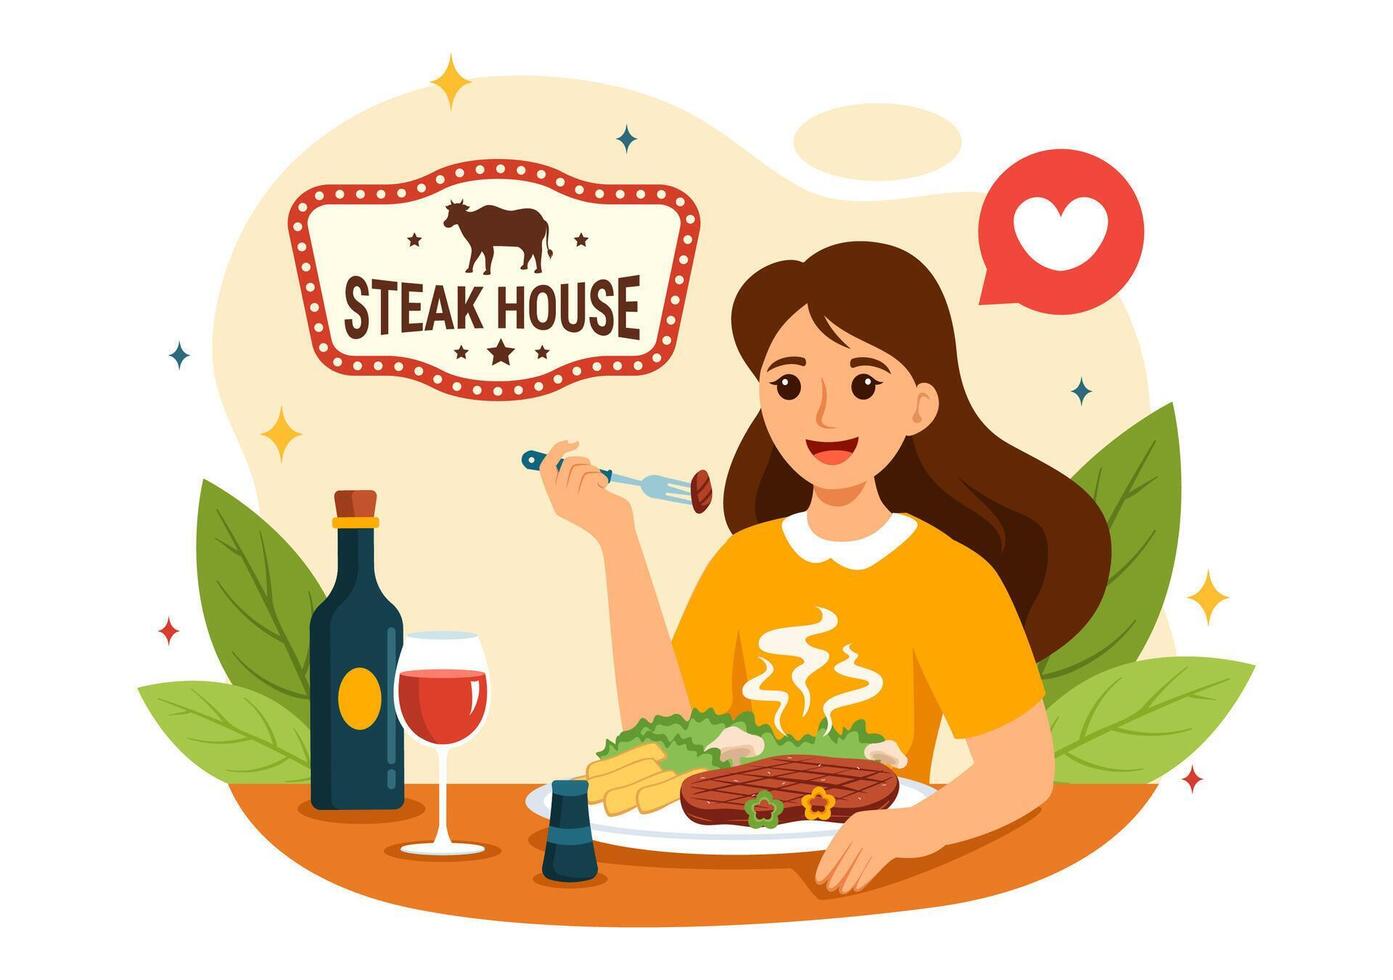 Steakhouse Vector Illustration with Restaurant that Provides Grilled Meat with Juicy Delicious Steak, Salad and Tomatoes for Barbecue in Background